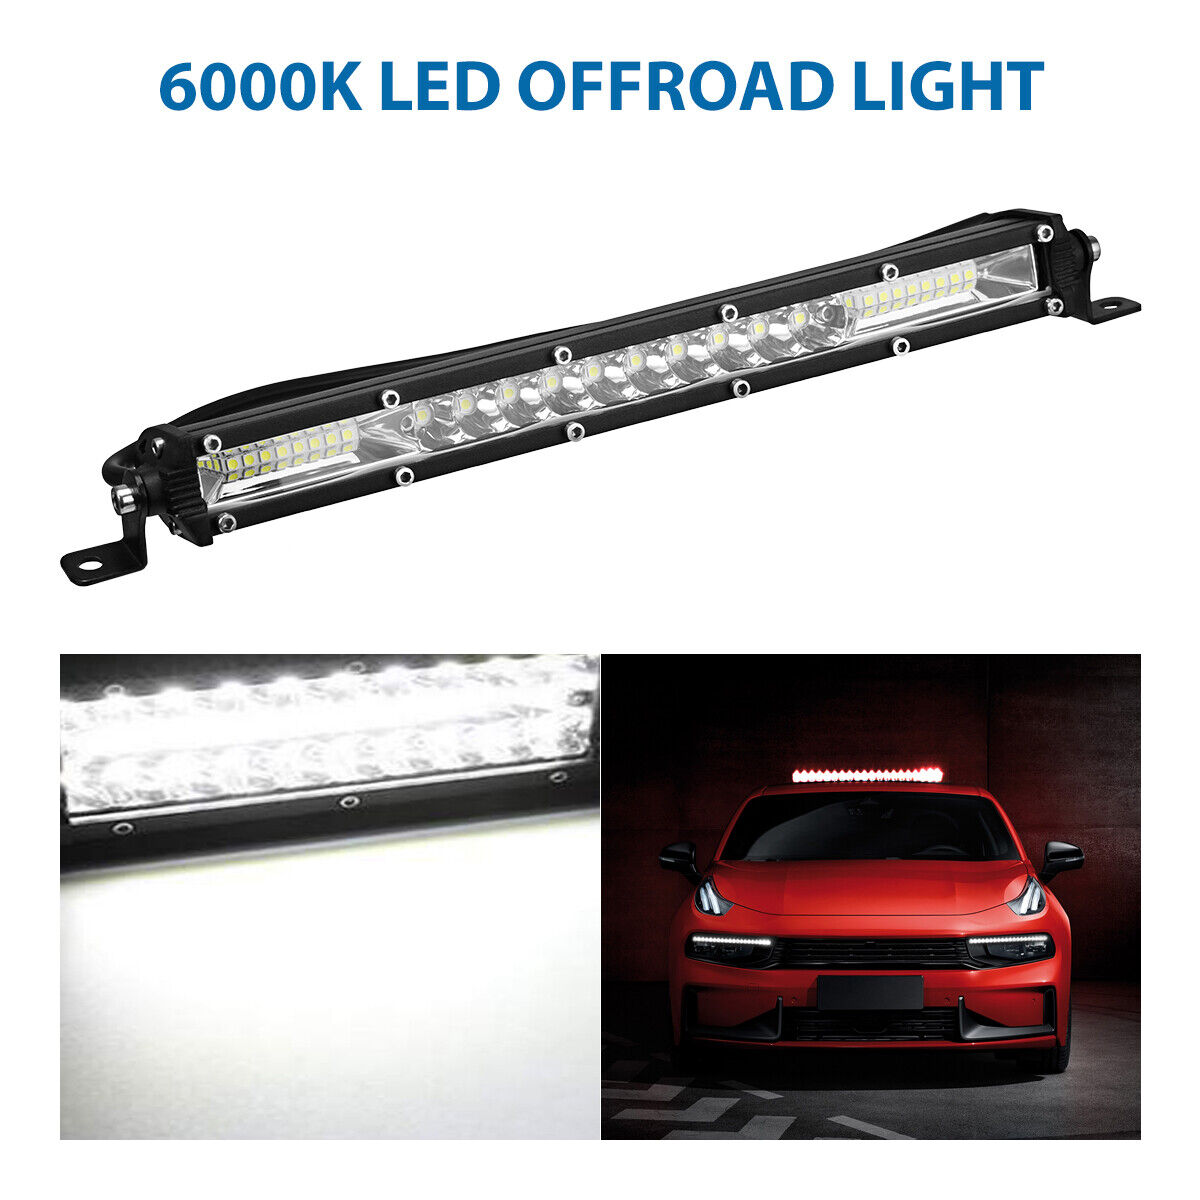 2x 12" inch 450W LED Work Light Bar Combo Spot Flood Driving Off Road SUV Boat Unbranded Does Not Apply - фотография #2